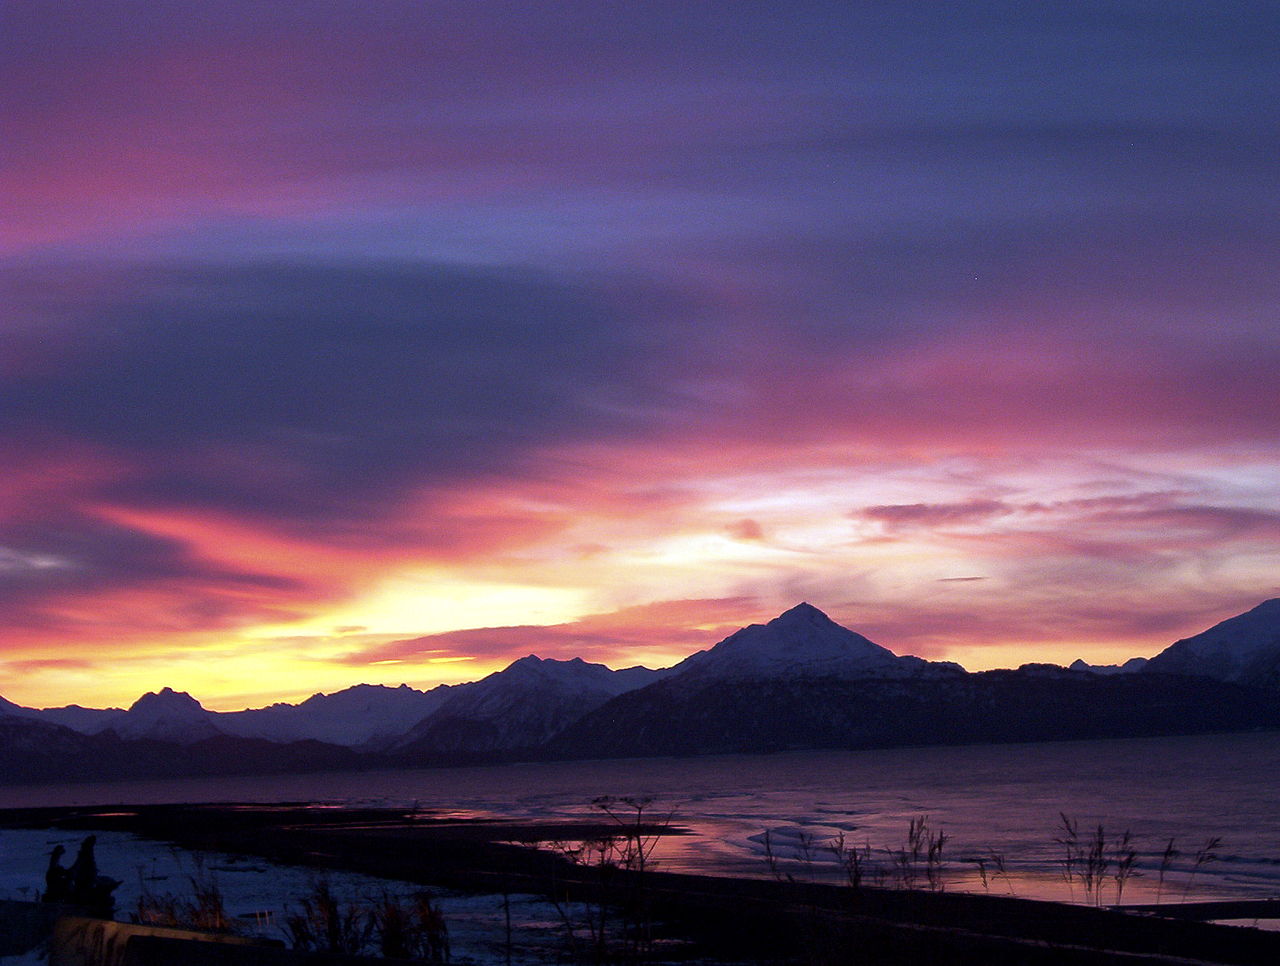 A sunrise over Kachemak Bay in Alaska, part of the Cook Inlet before it is destroyed by oil drilling.